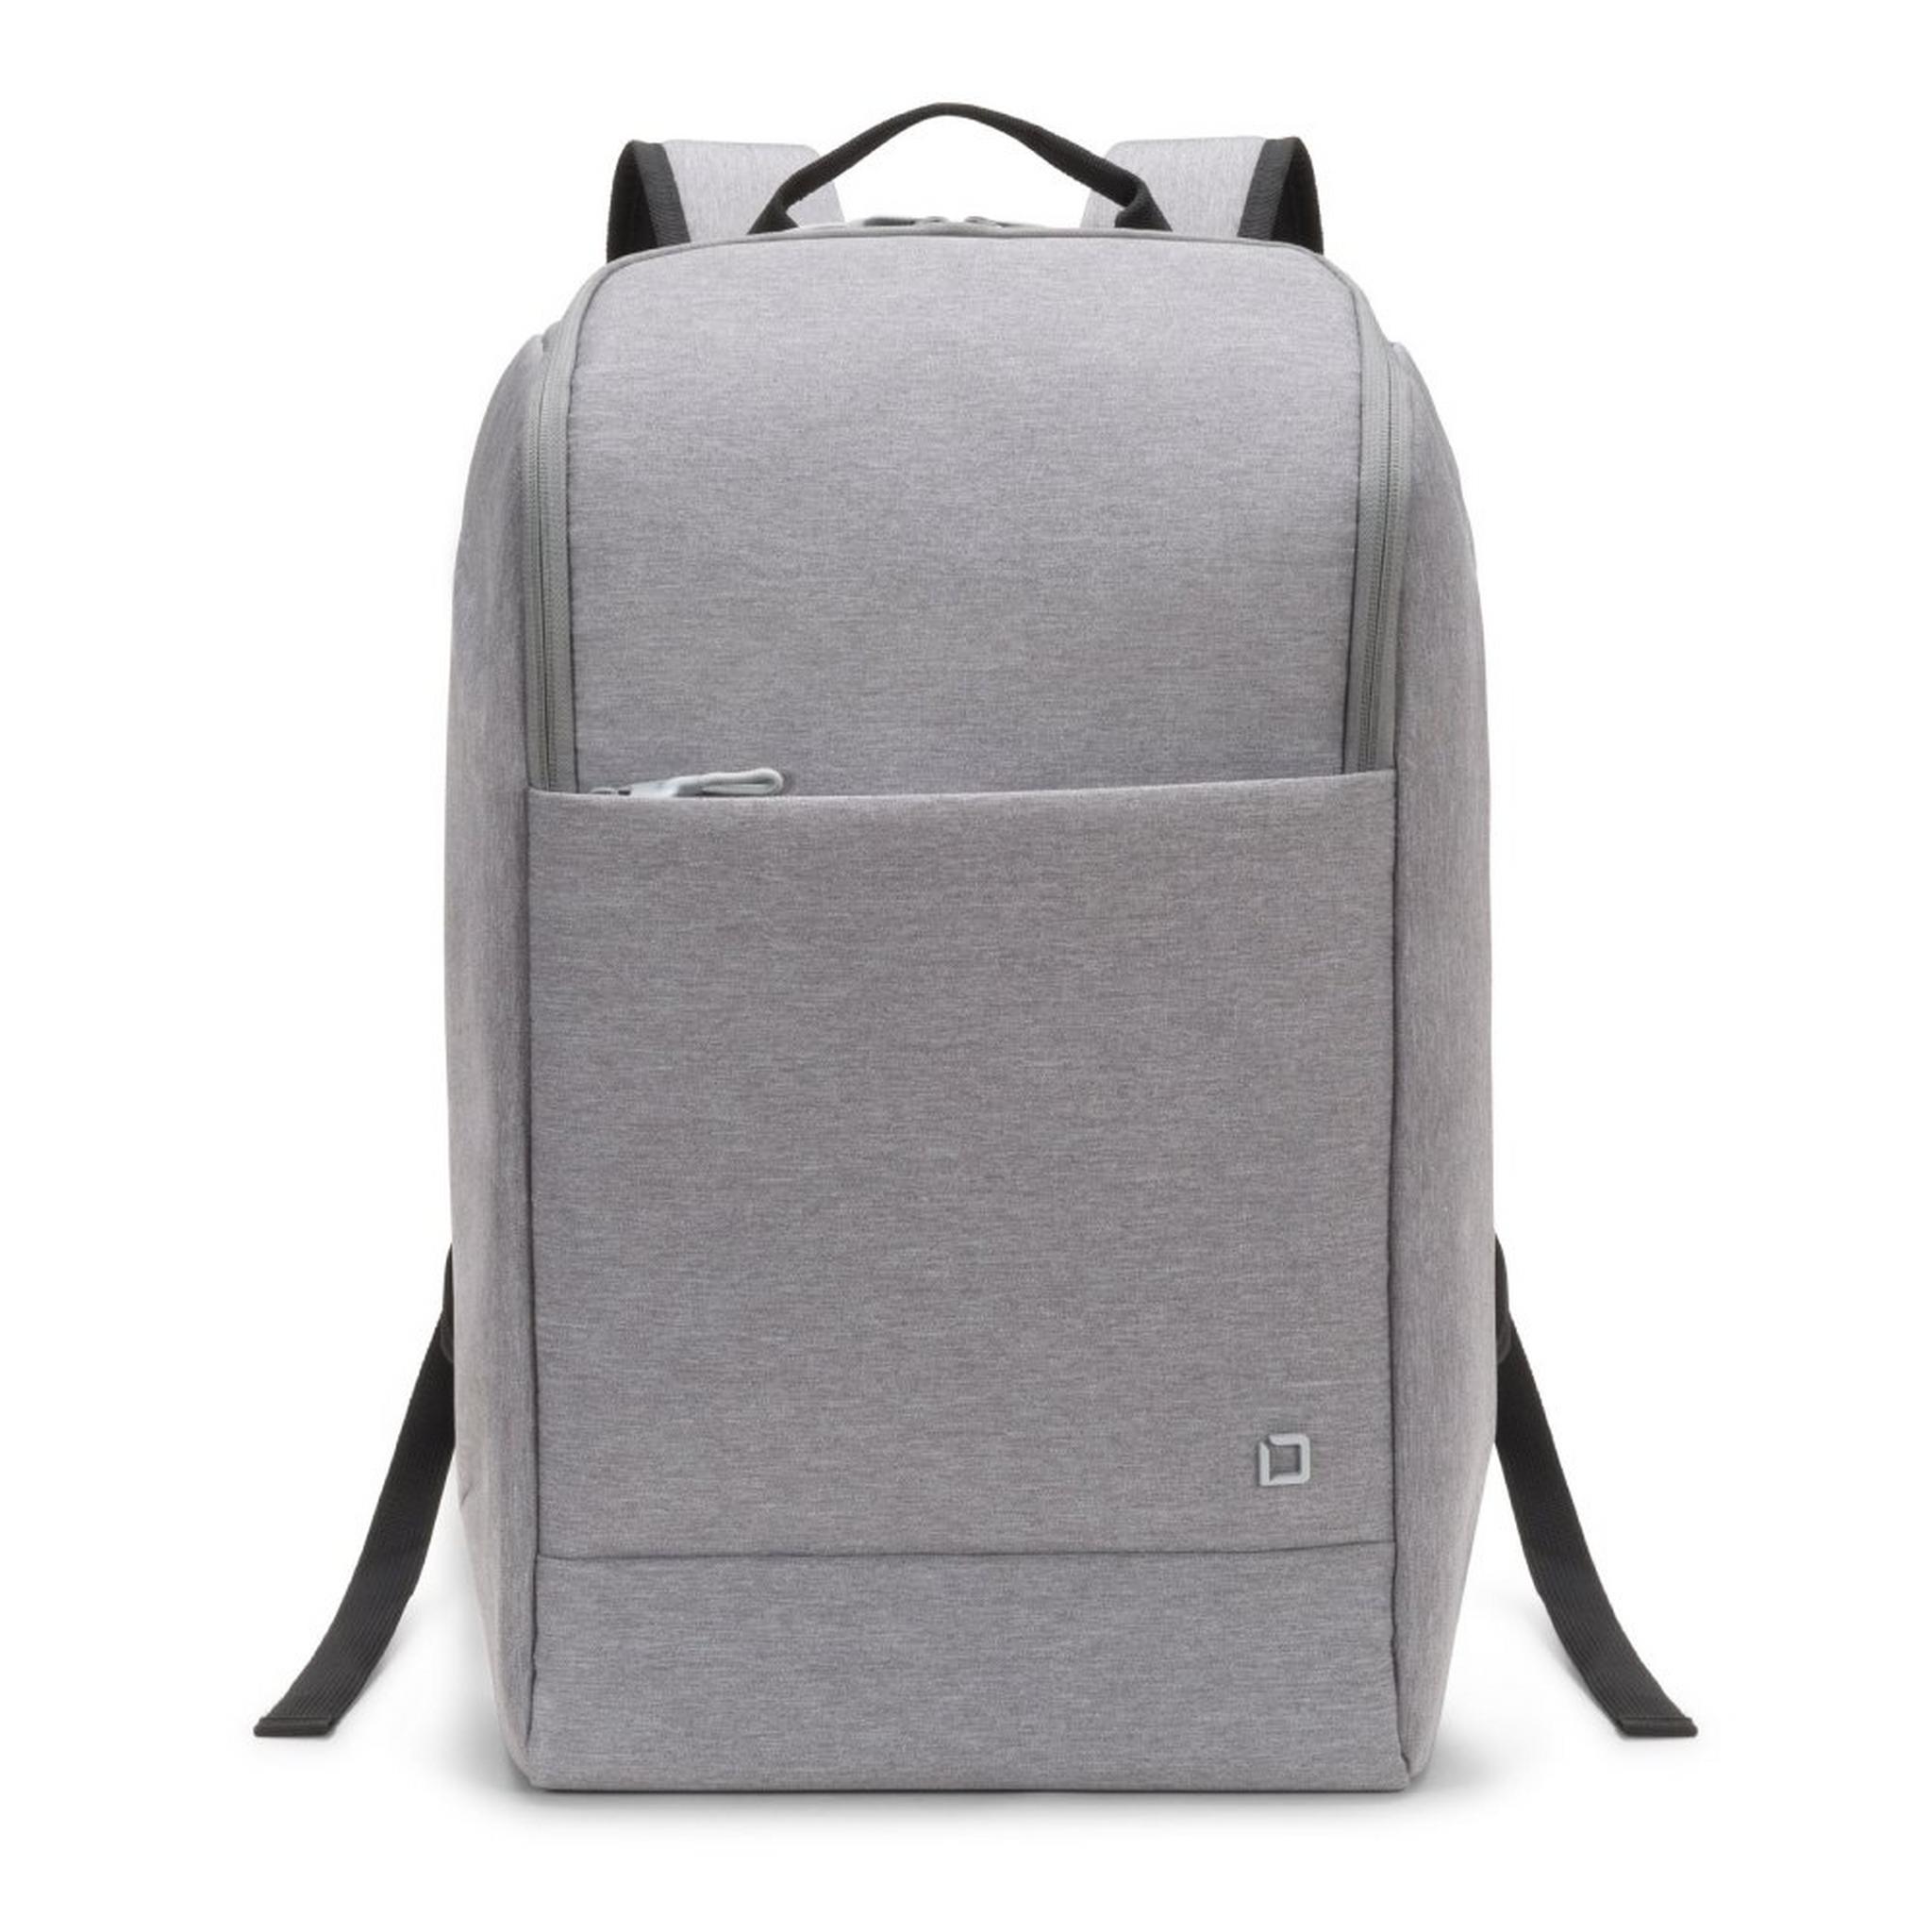 Dicota Eco Motion Backpack for 15.6-inch Laptop - Grey